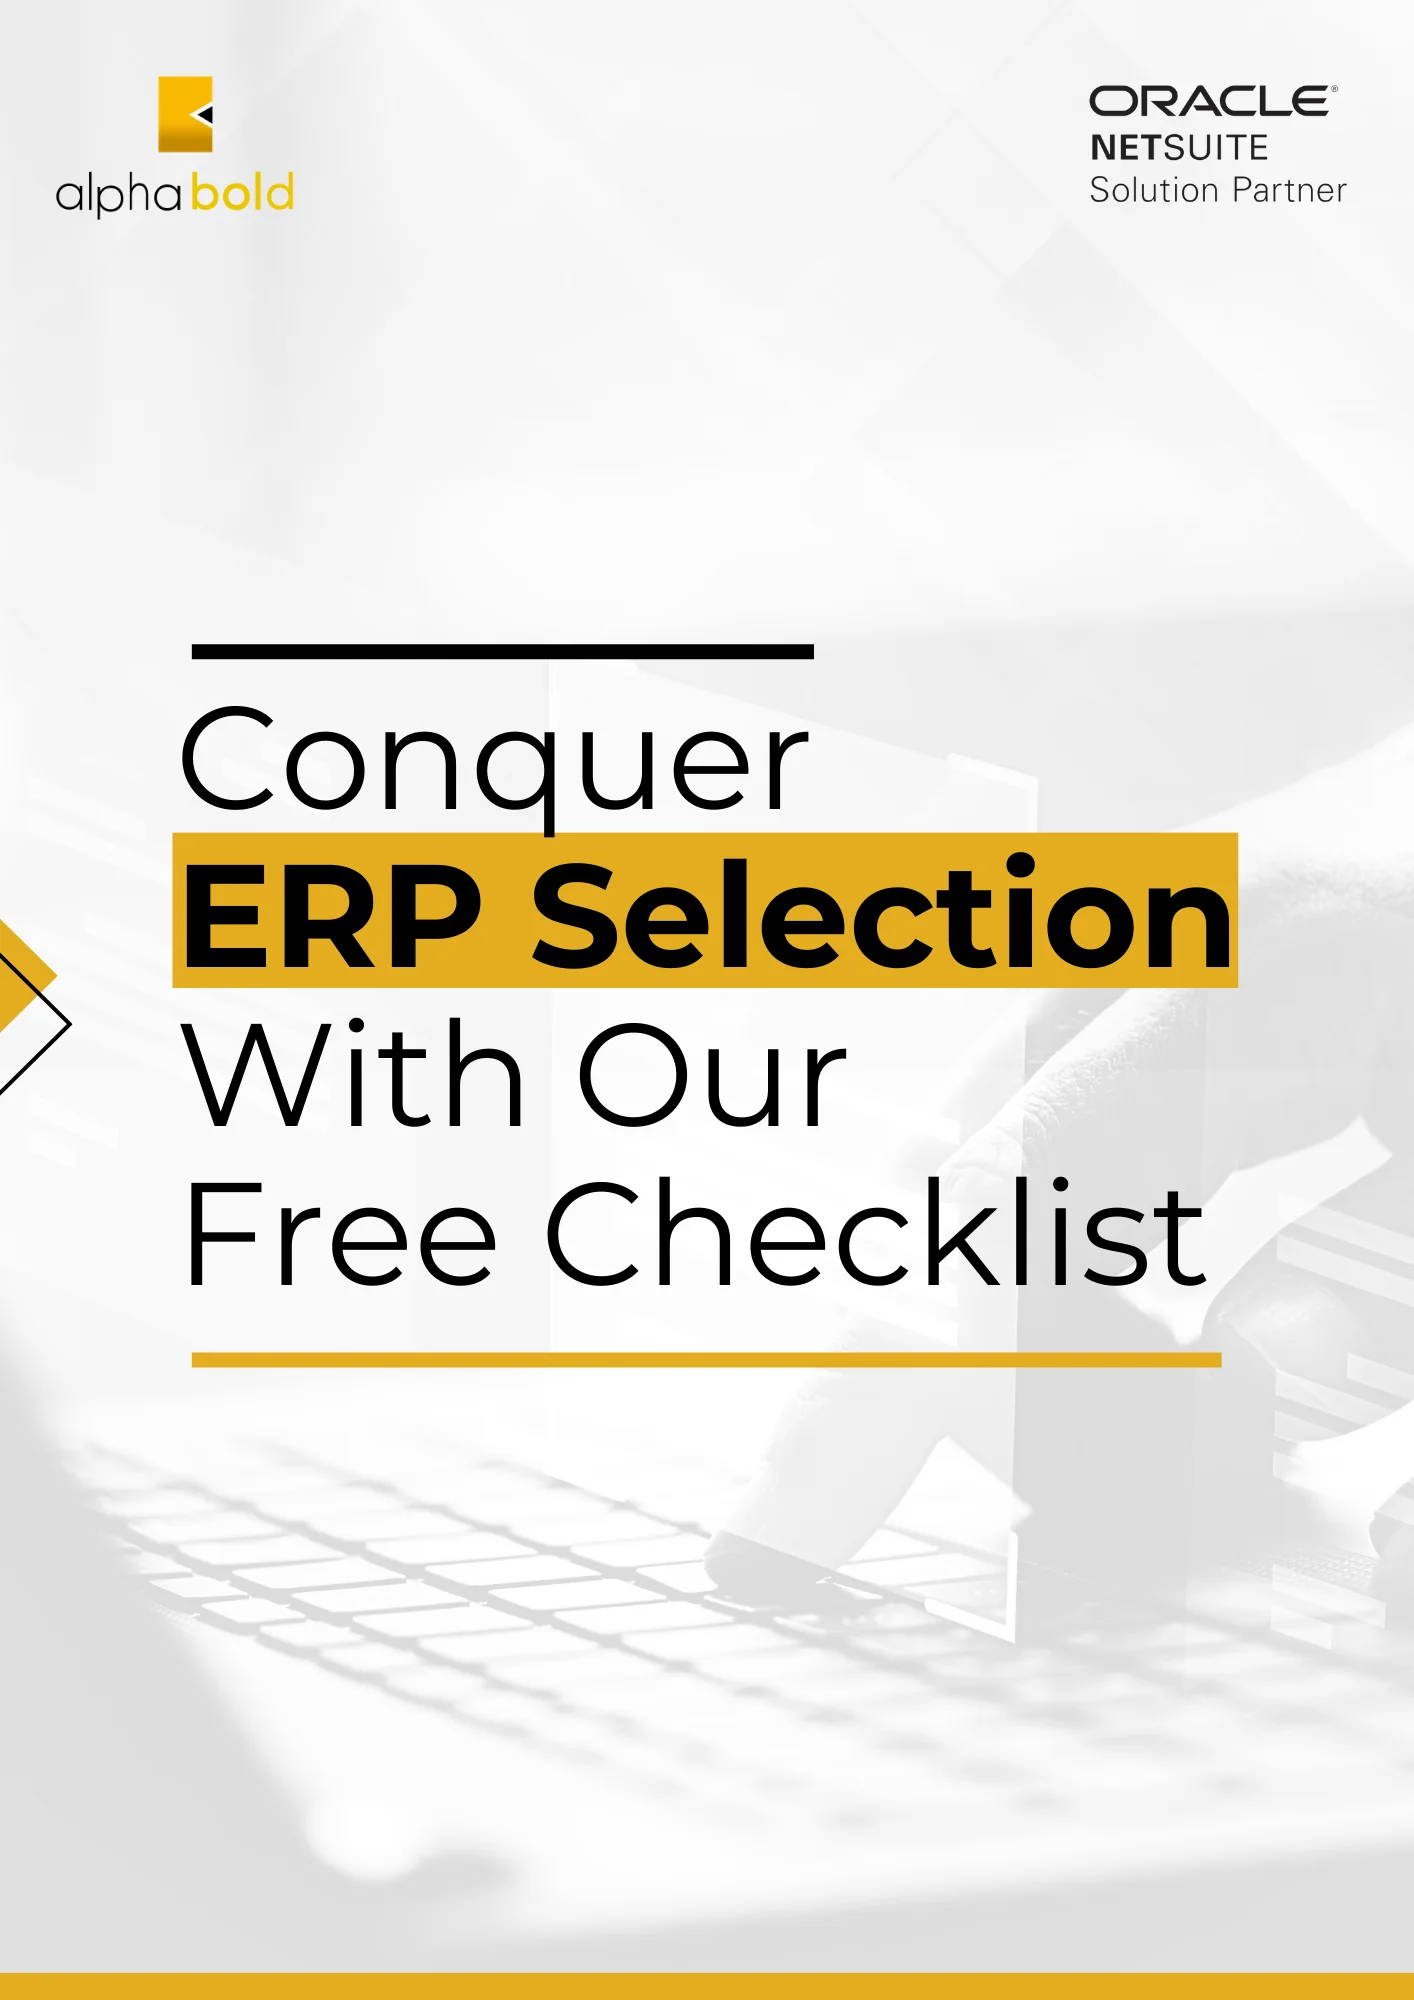 this image shows the Conquer ERP Selection With Our Free Checklist